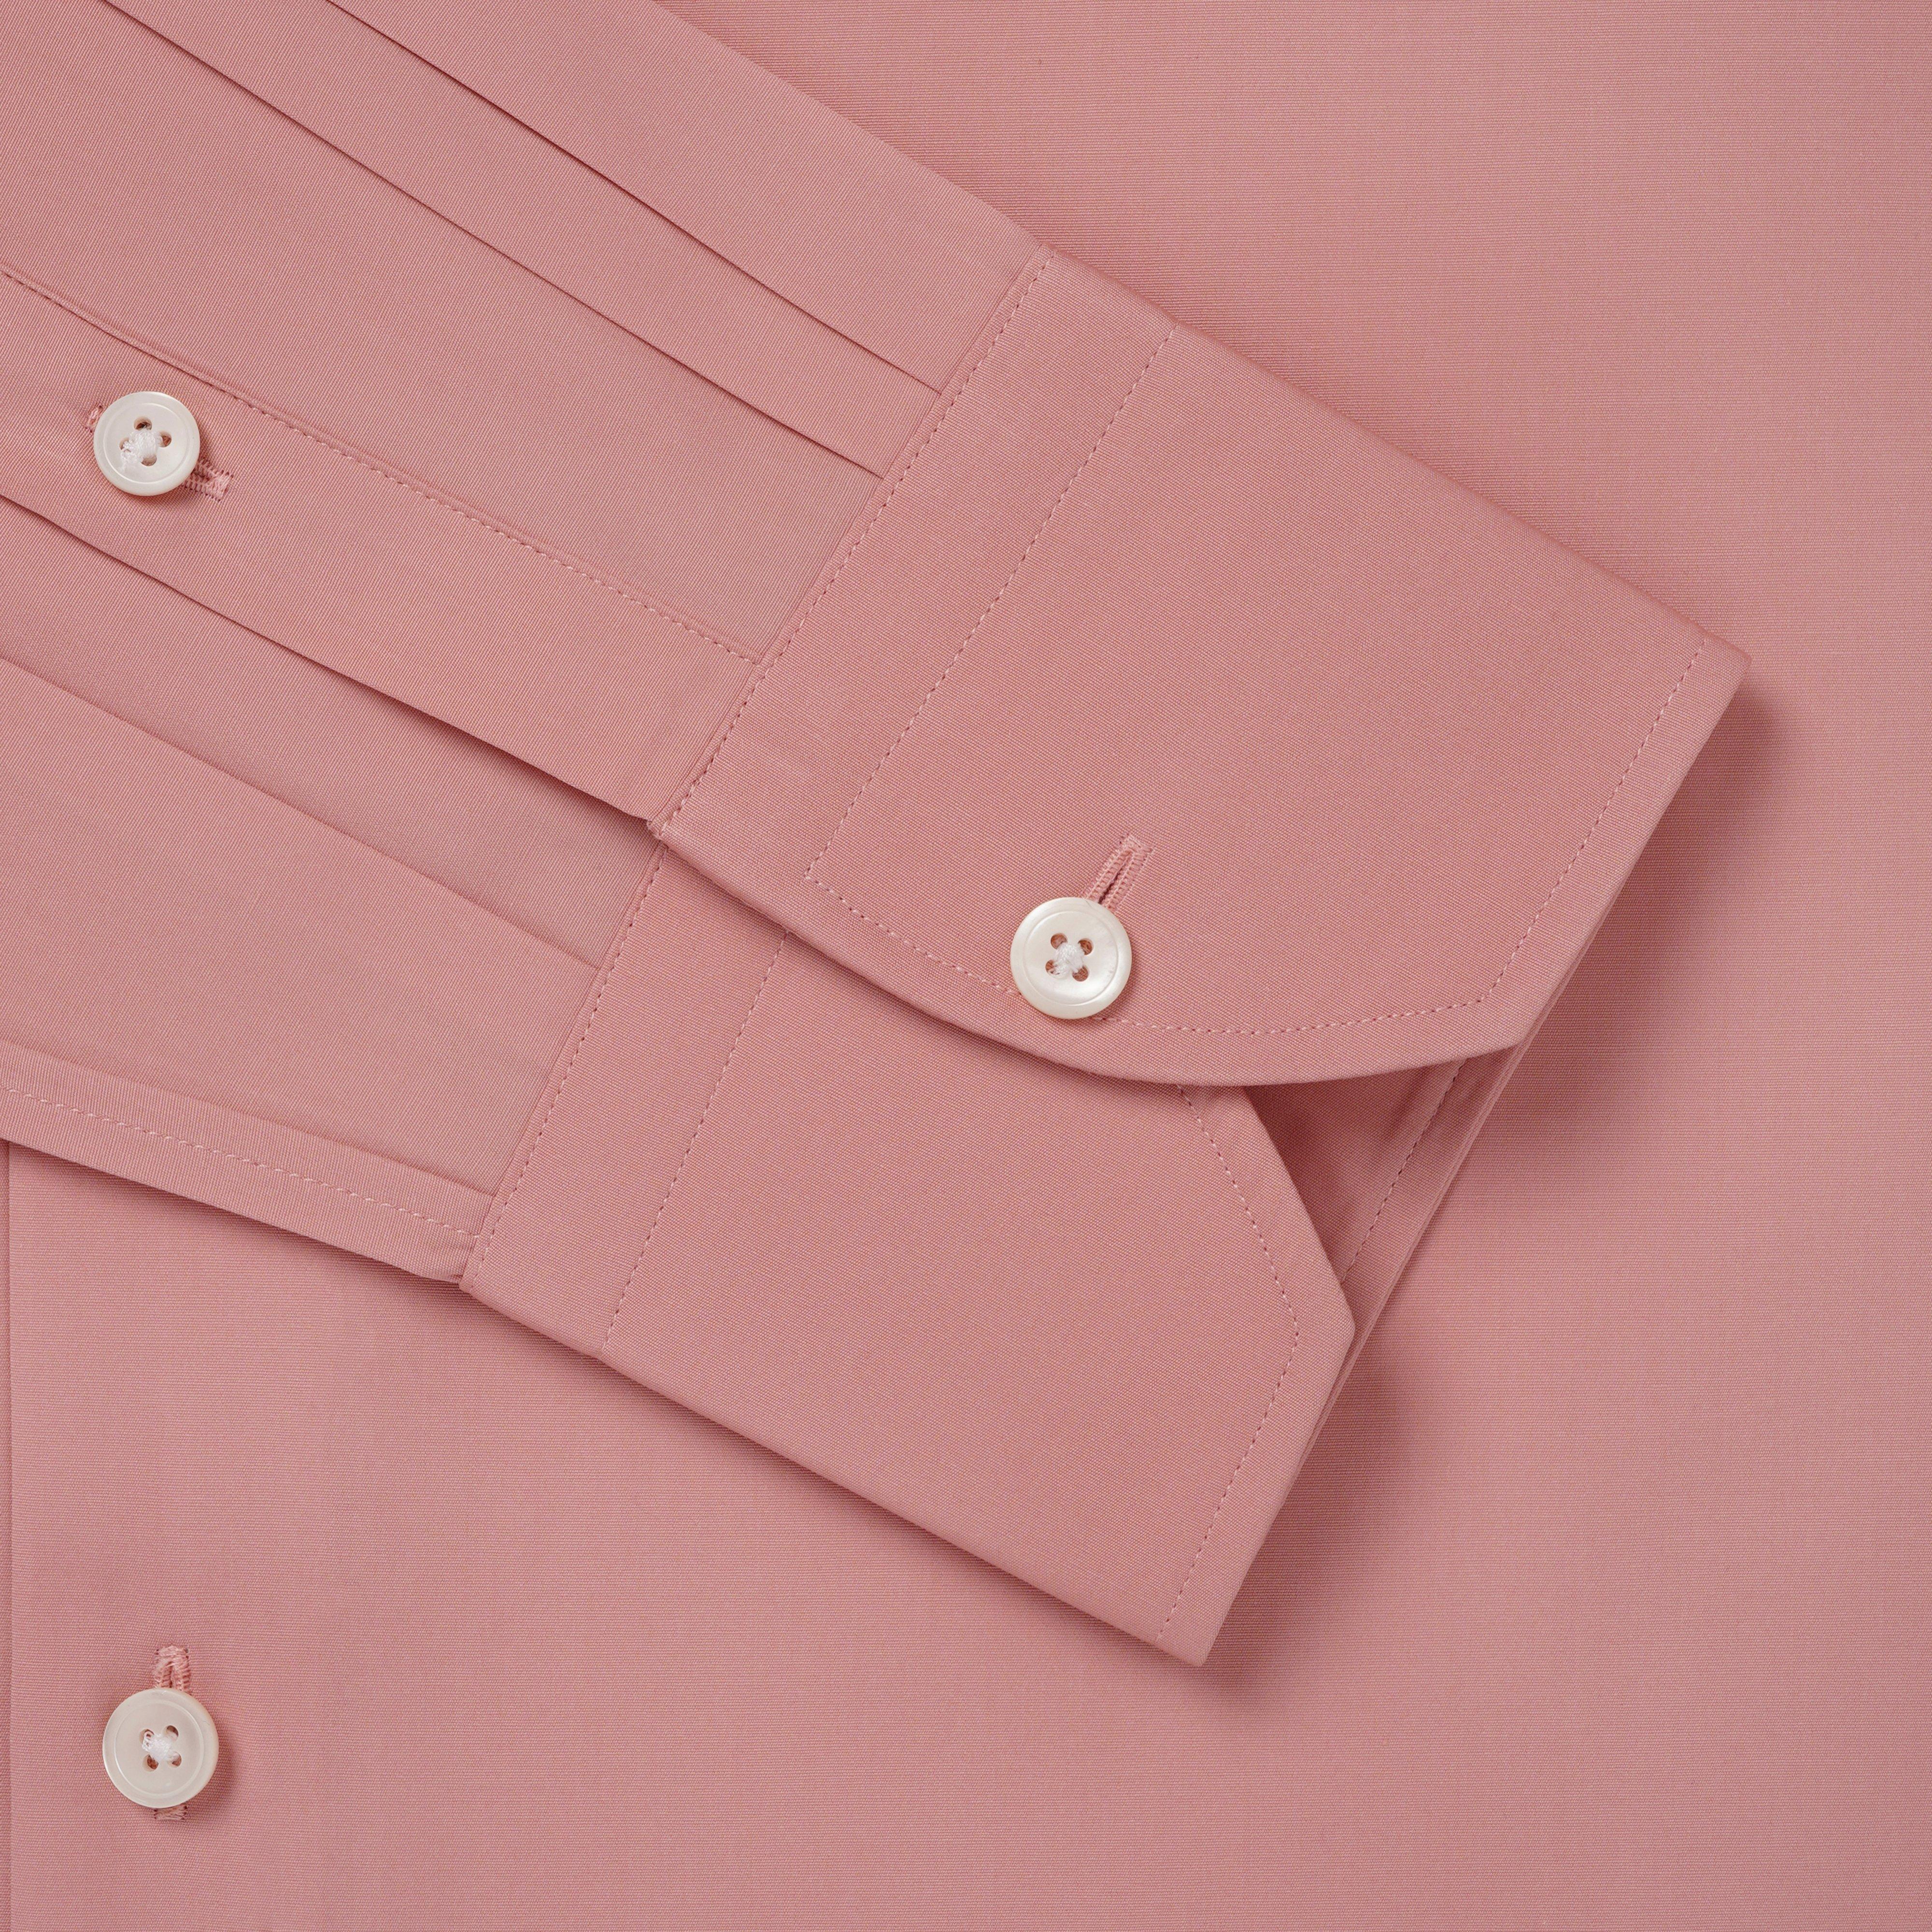 THOMAS PINK SHIRTS S/S 2017 LC:M - THE JOEY JOURNAL